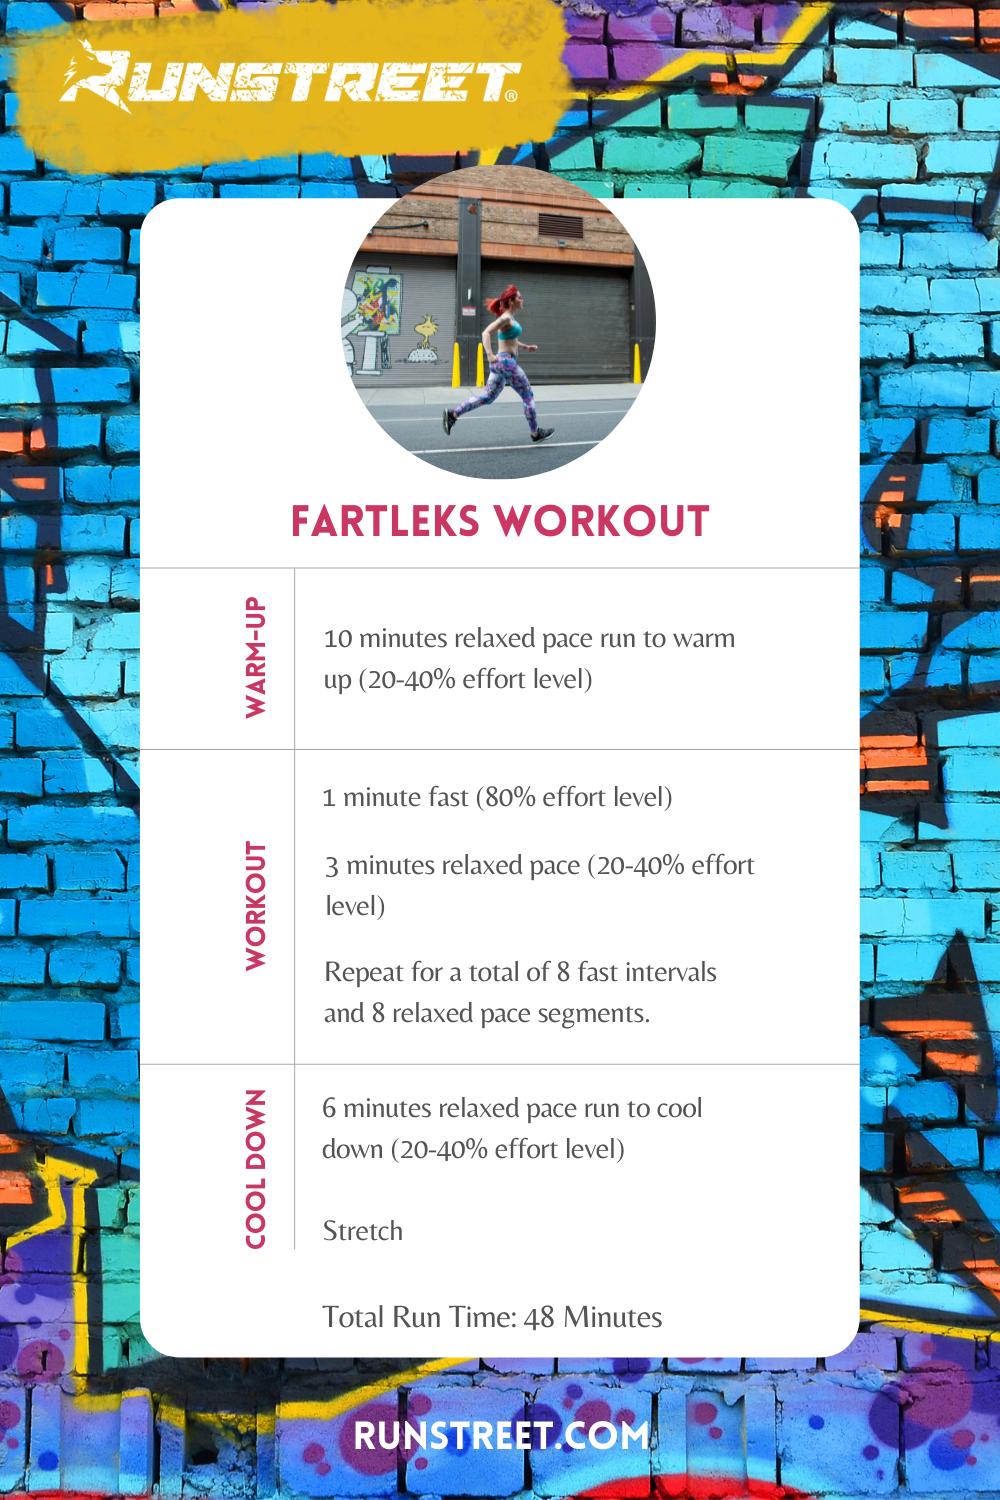 Running Wednesday: My Favorite Pure Speed Workout